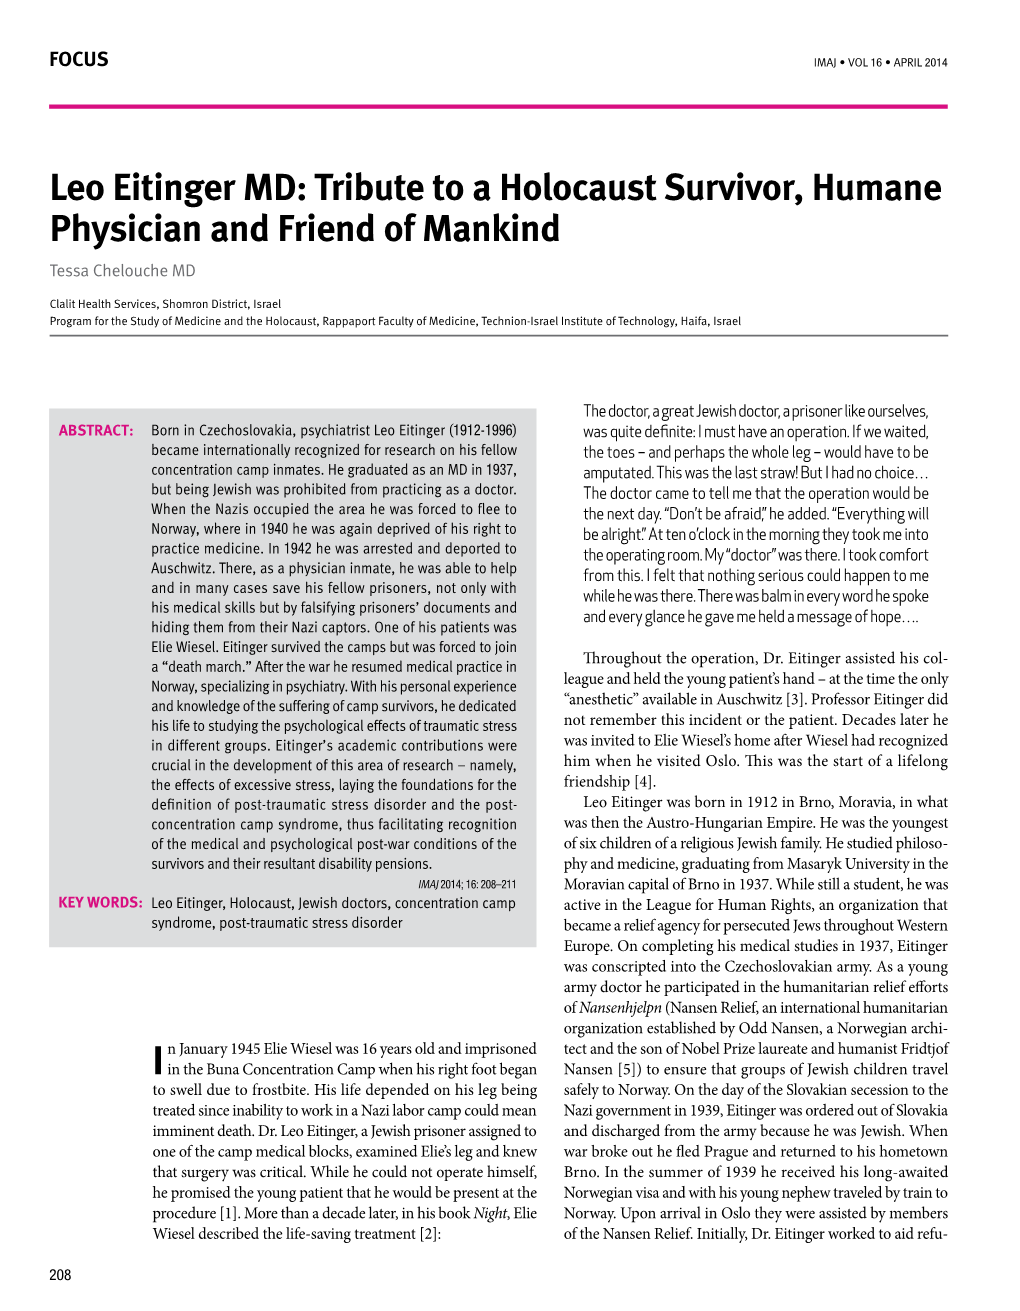 Leo Eitinger MD: Tribute to a Holocaust Survivor, Humane Physician and Friend of Mankind Tessa Chelouche MD